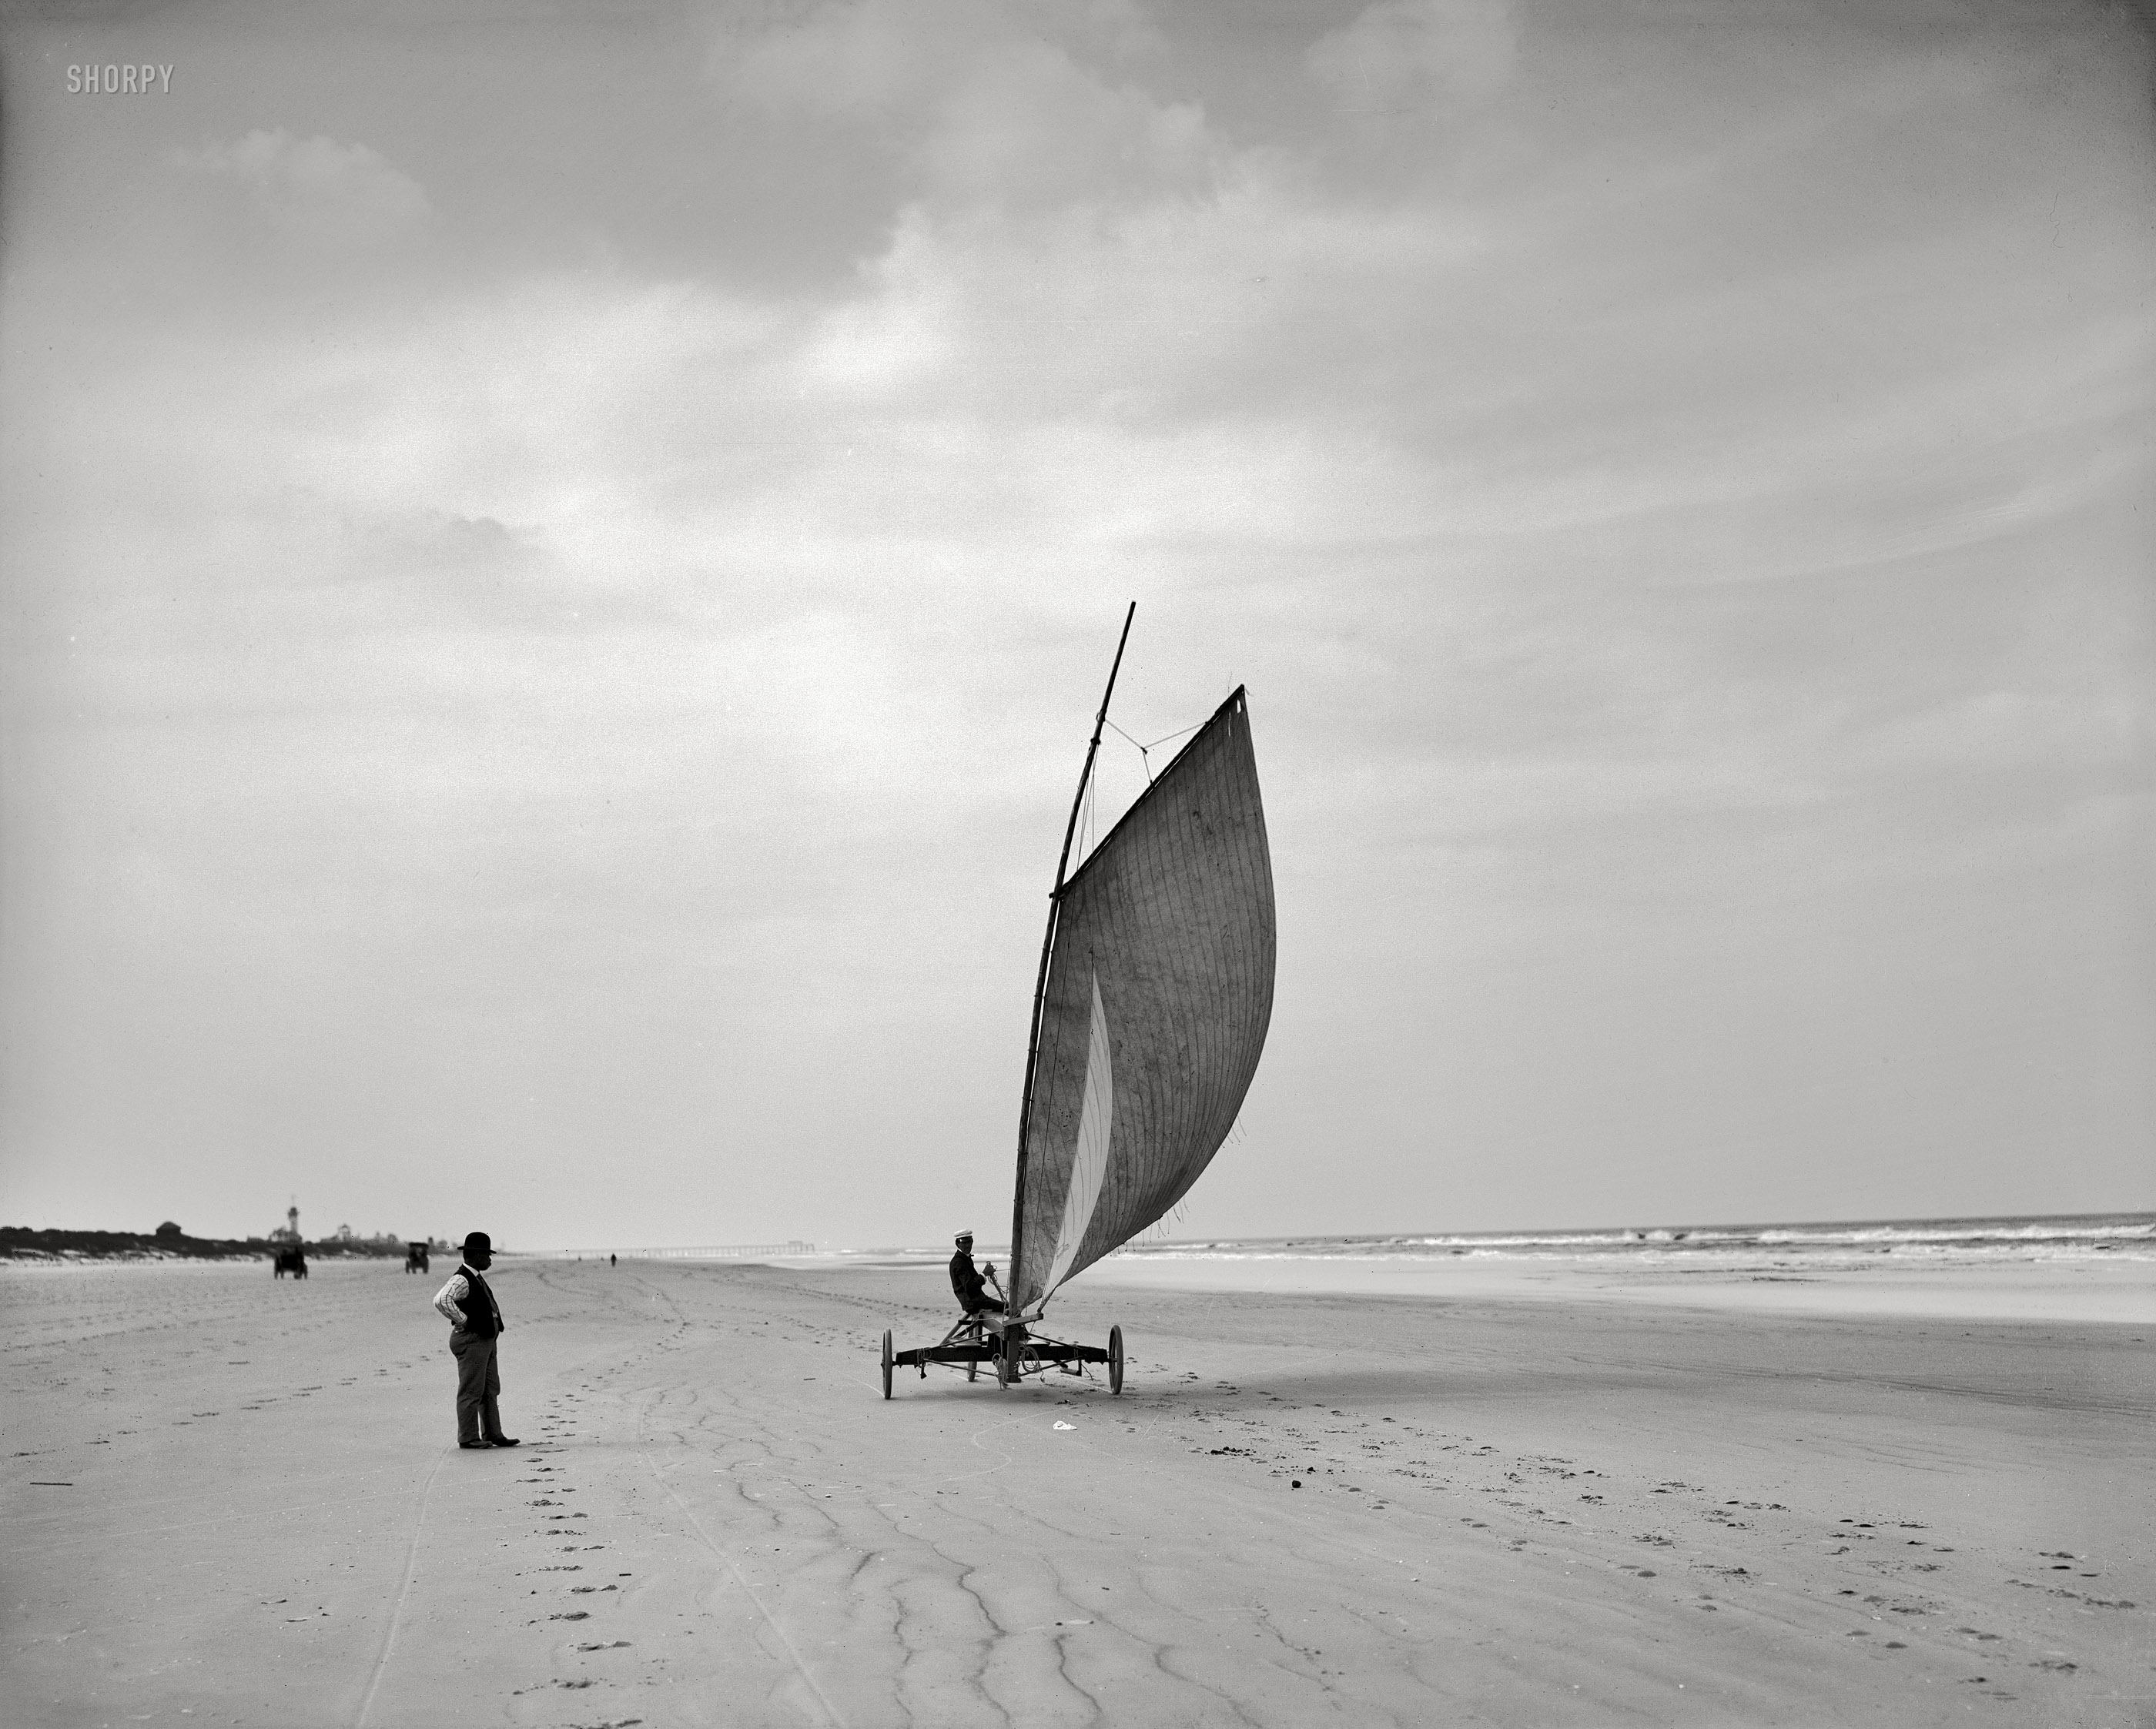 Circa 1905. "Sailing on the beach -- Ormond, Florida." It'll never take off. 8x10 inch dry plate glass negative, Detroit Publishing Company. View full size.